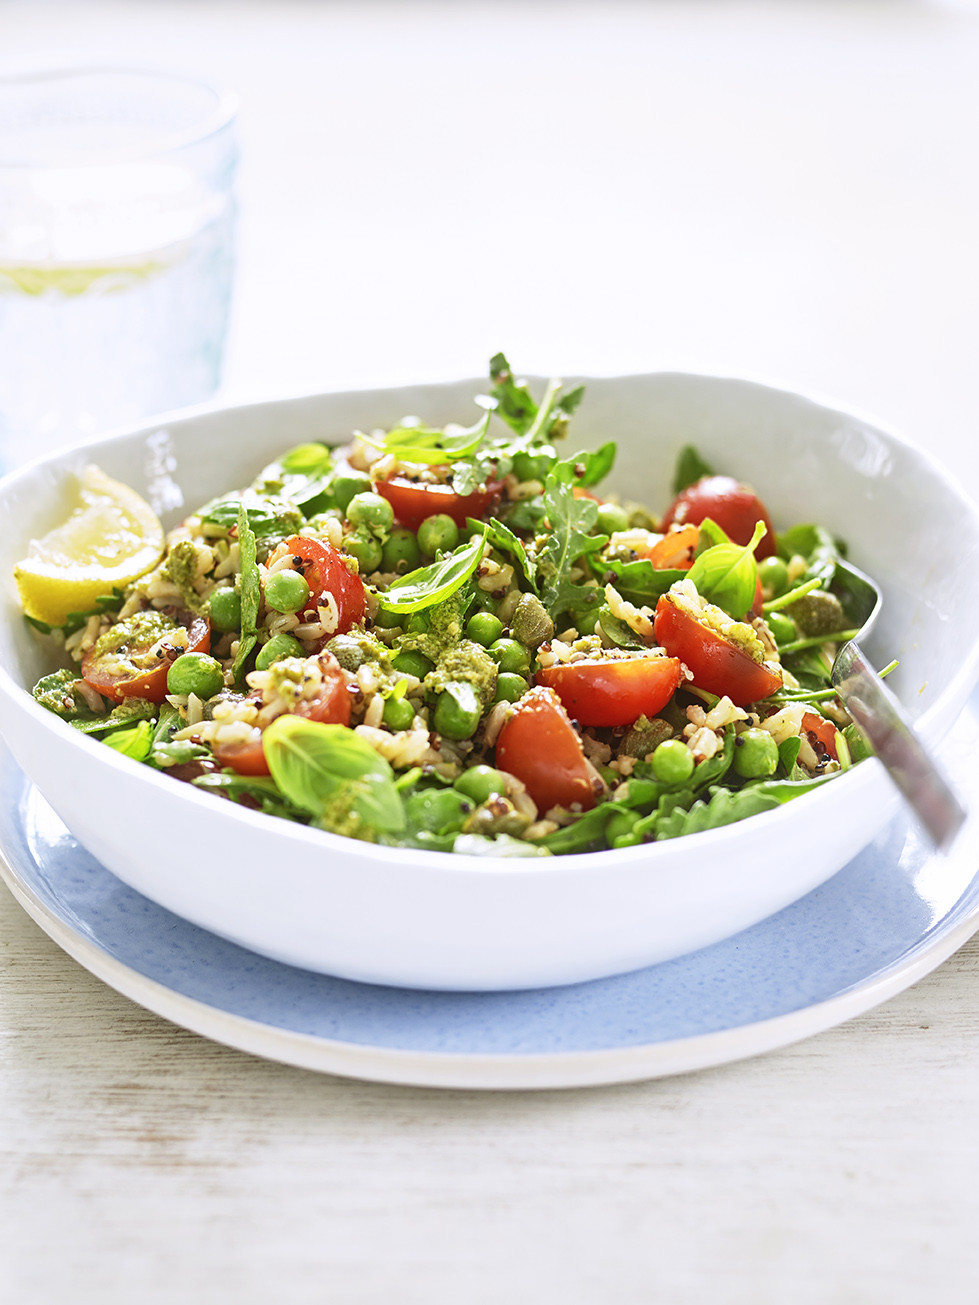 Capers Recipes Vegetarian
 RICE SALAD WITH PEAS ROCKET TOMATOES AND CAPERS